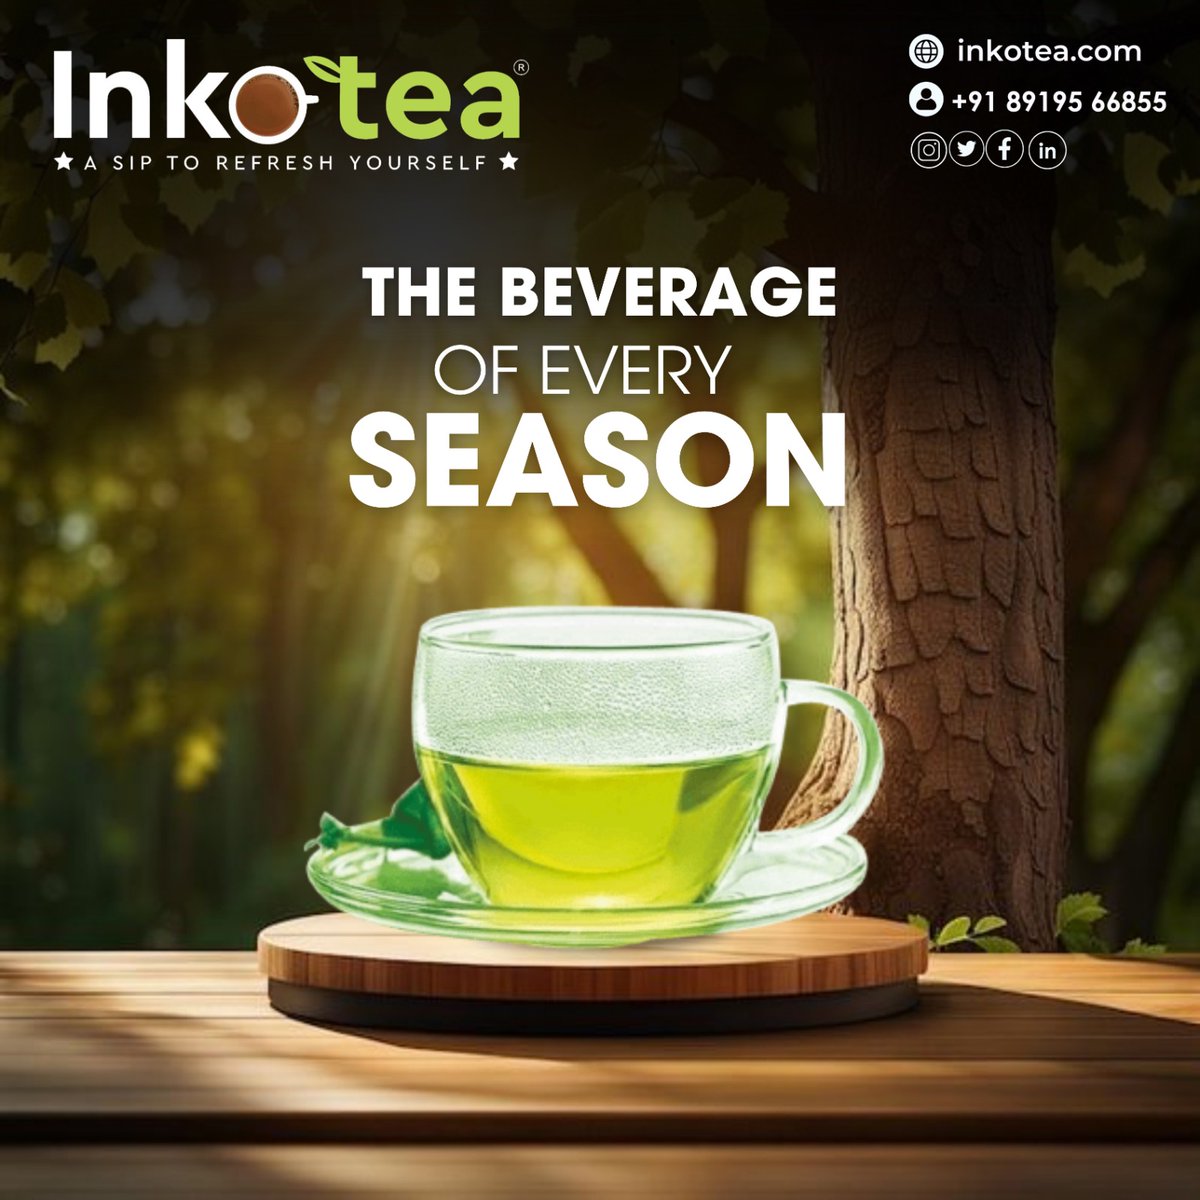 ☕🍵 Discover the beverage of every season at Inkotea Cafe! Whether you're warming up with a hot latte in the winter 

#InkoteaCafe #SeasonalDrinks #CoffeeLovers #TeaTime #BeverageBliss #Gingertea #SavorTheSip #TeaFlavors #TeaExploration #TeaAdventures #TeaEnthusiast #TeaGoals